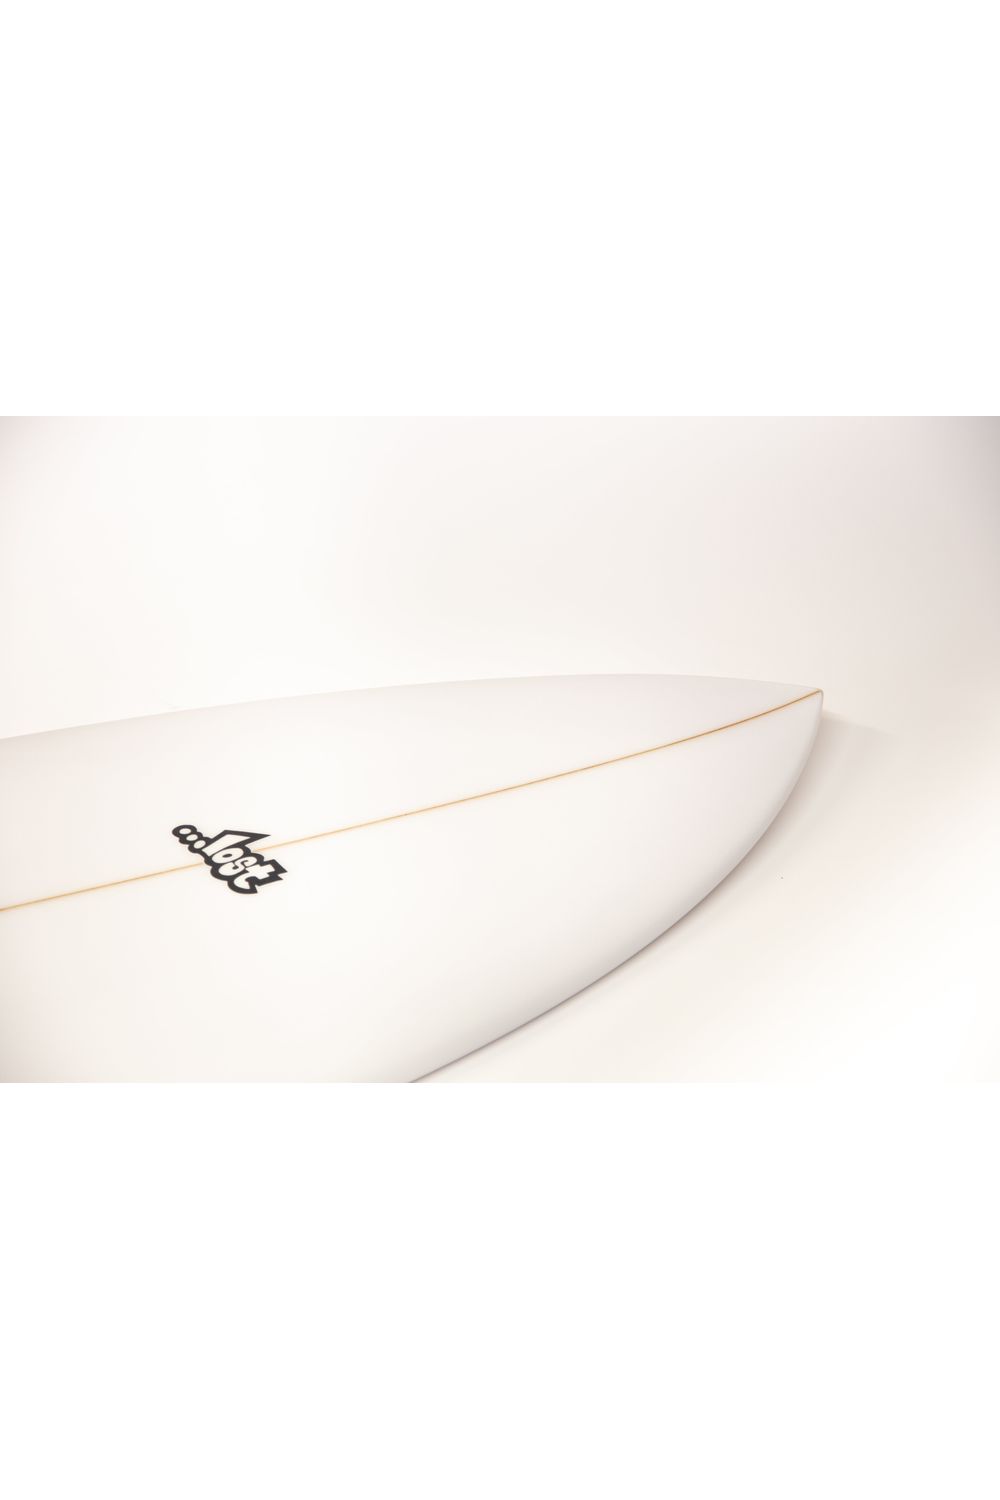 Lost Round Nose Fish 96, 6'1 Surfboard 39.50L PU Futures 3 Fins